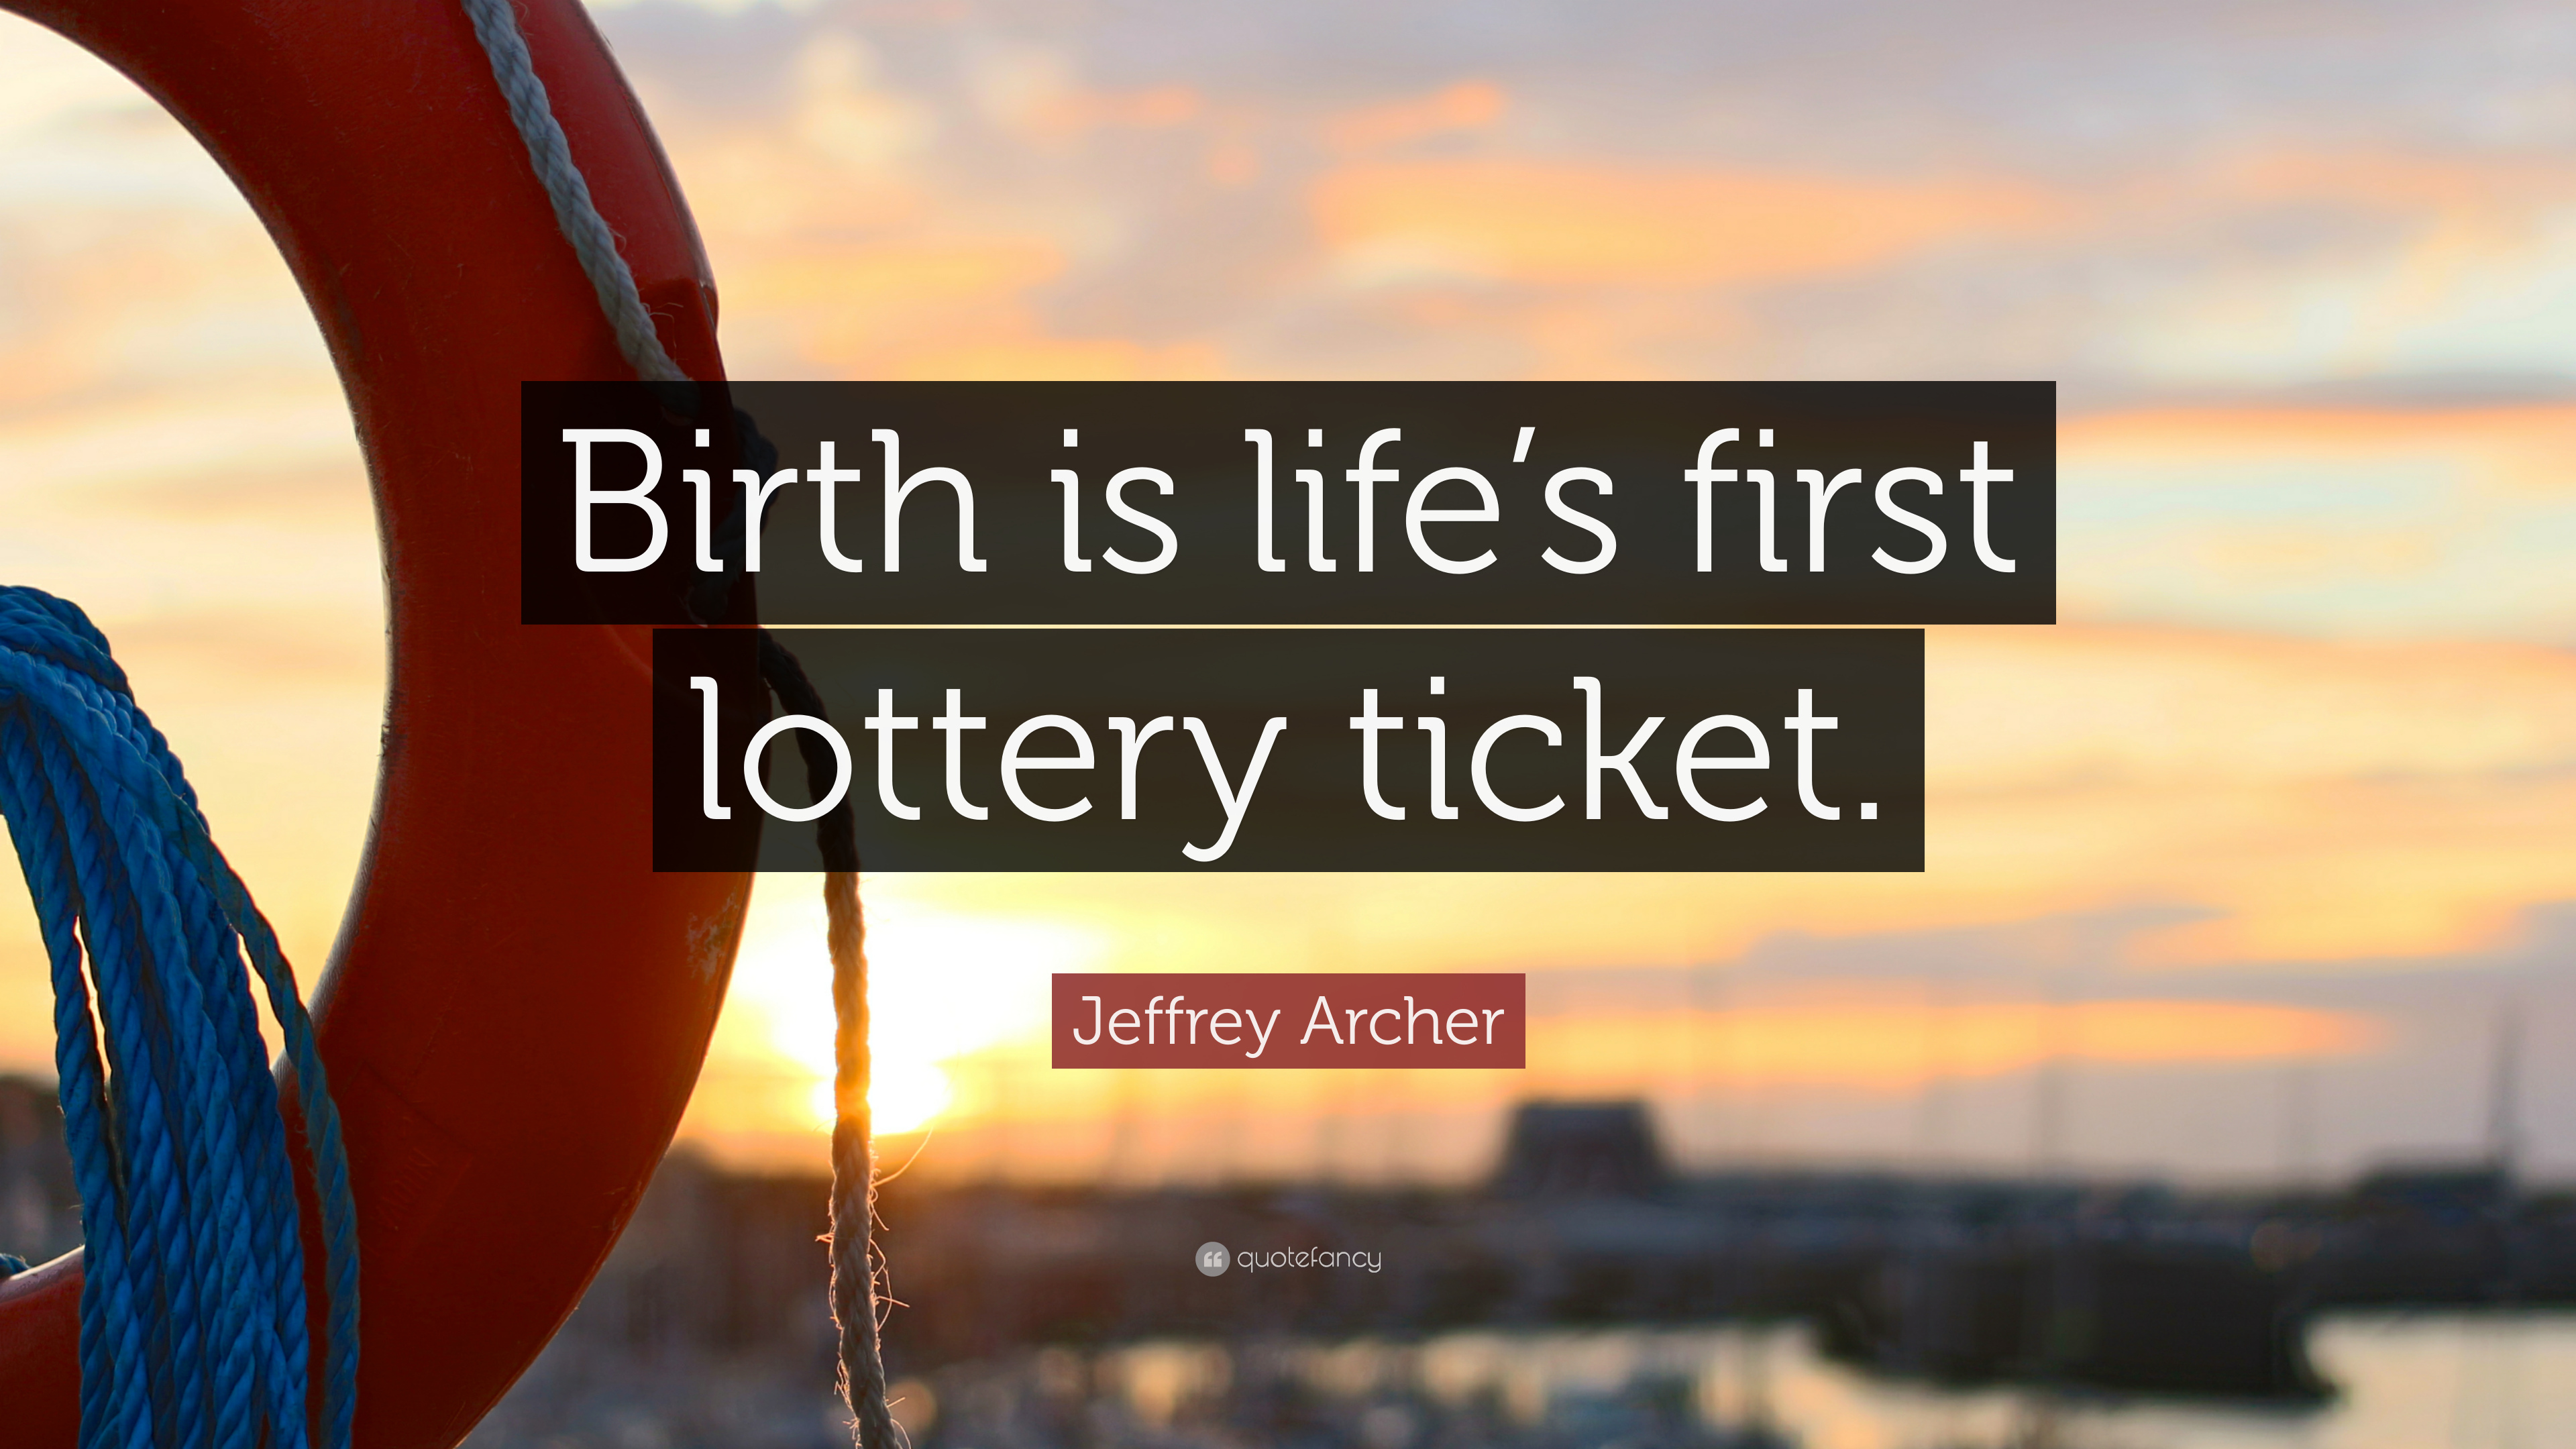 Jeffrey Archer Quote: "Birth is life's first lottery ticket.